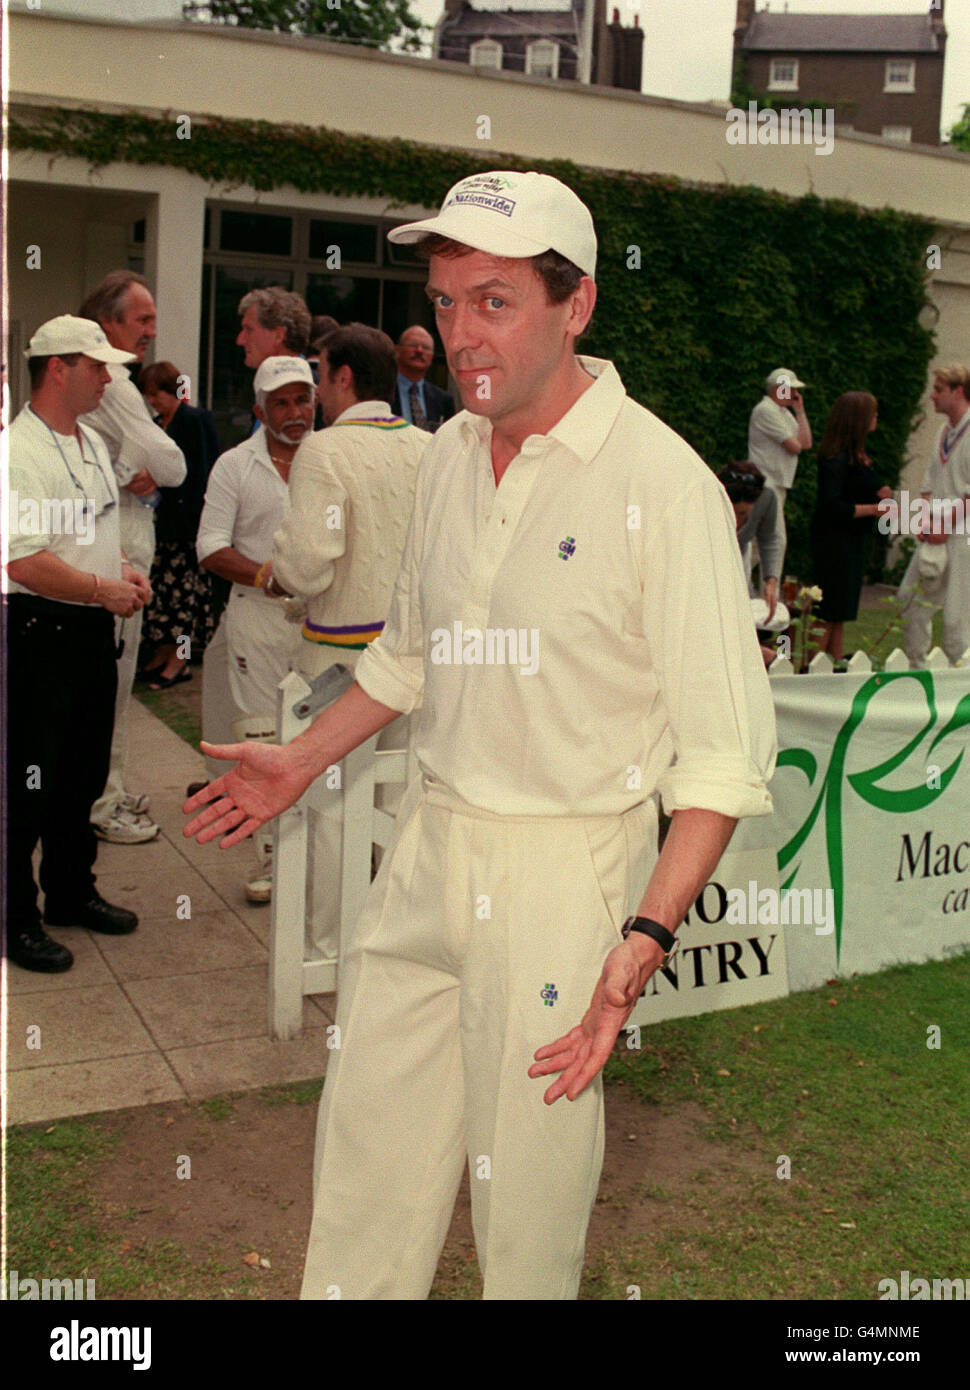 Comedian and television actor Hugh Laurie at the annual Macmillan Garter charity cricket match, in which Laurie's Cowboys XI and Deryck Murray's Macmillan XI play for the Honour of the Garter. Stock Photo